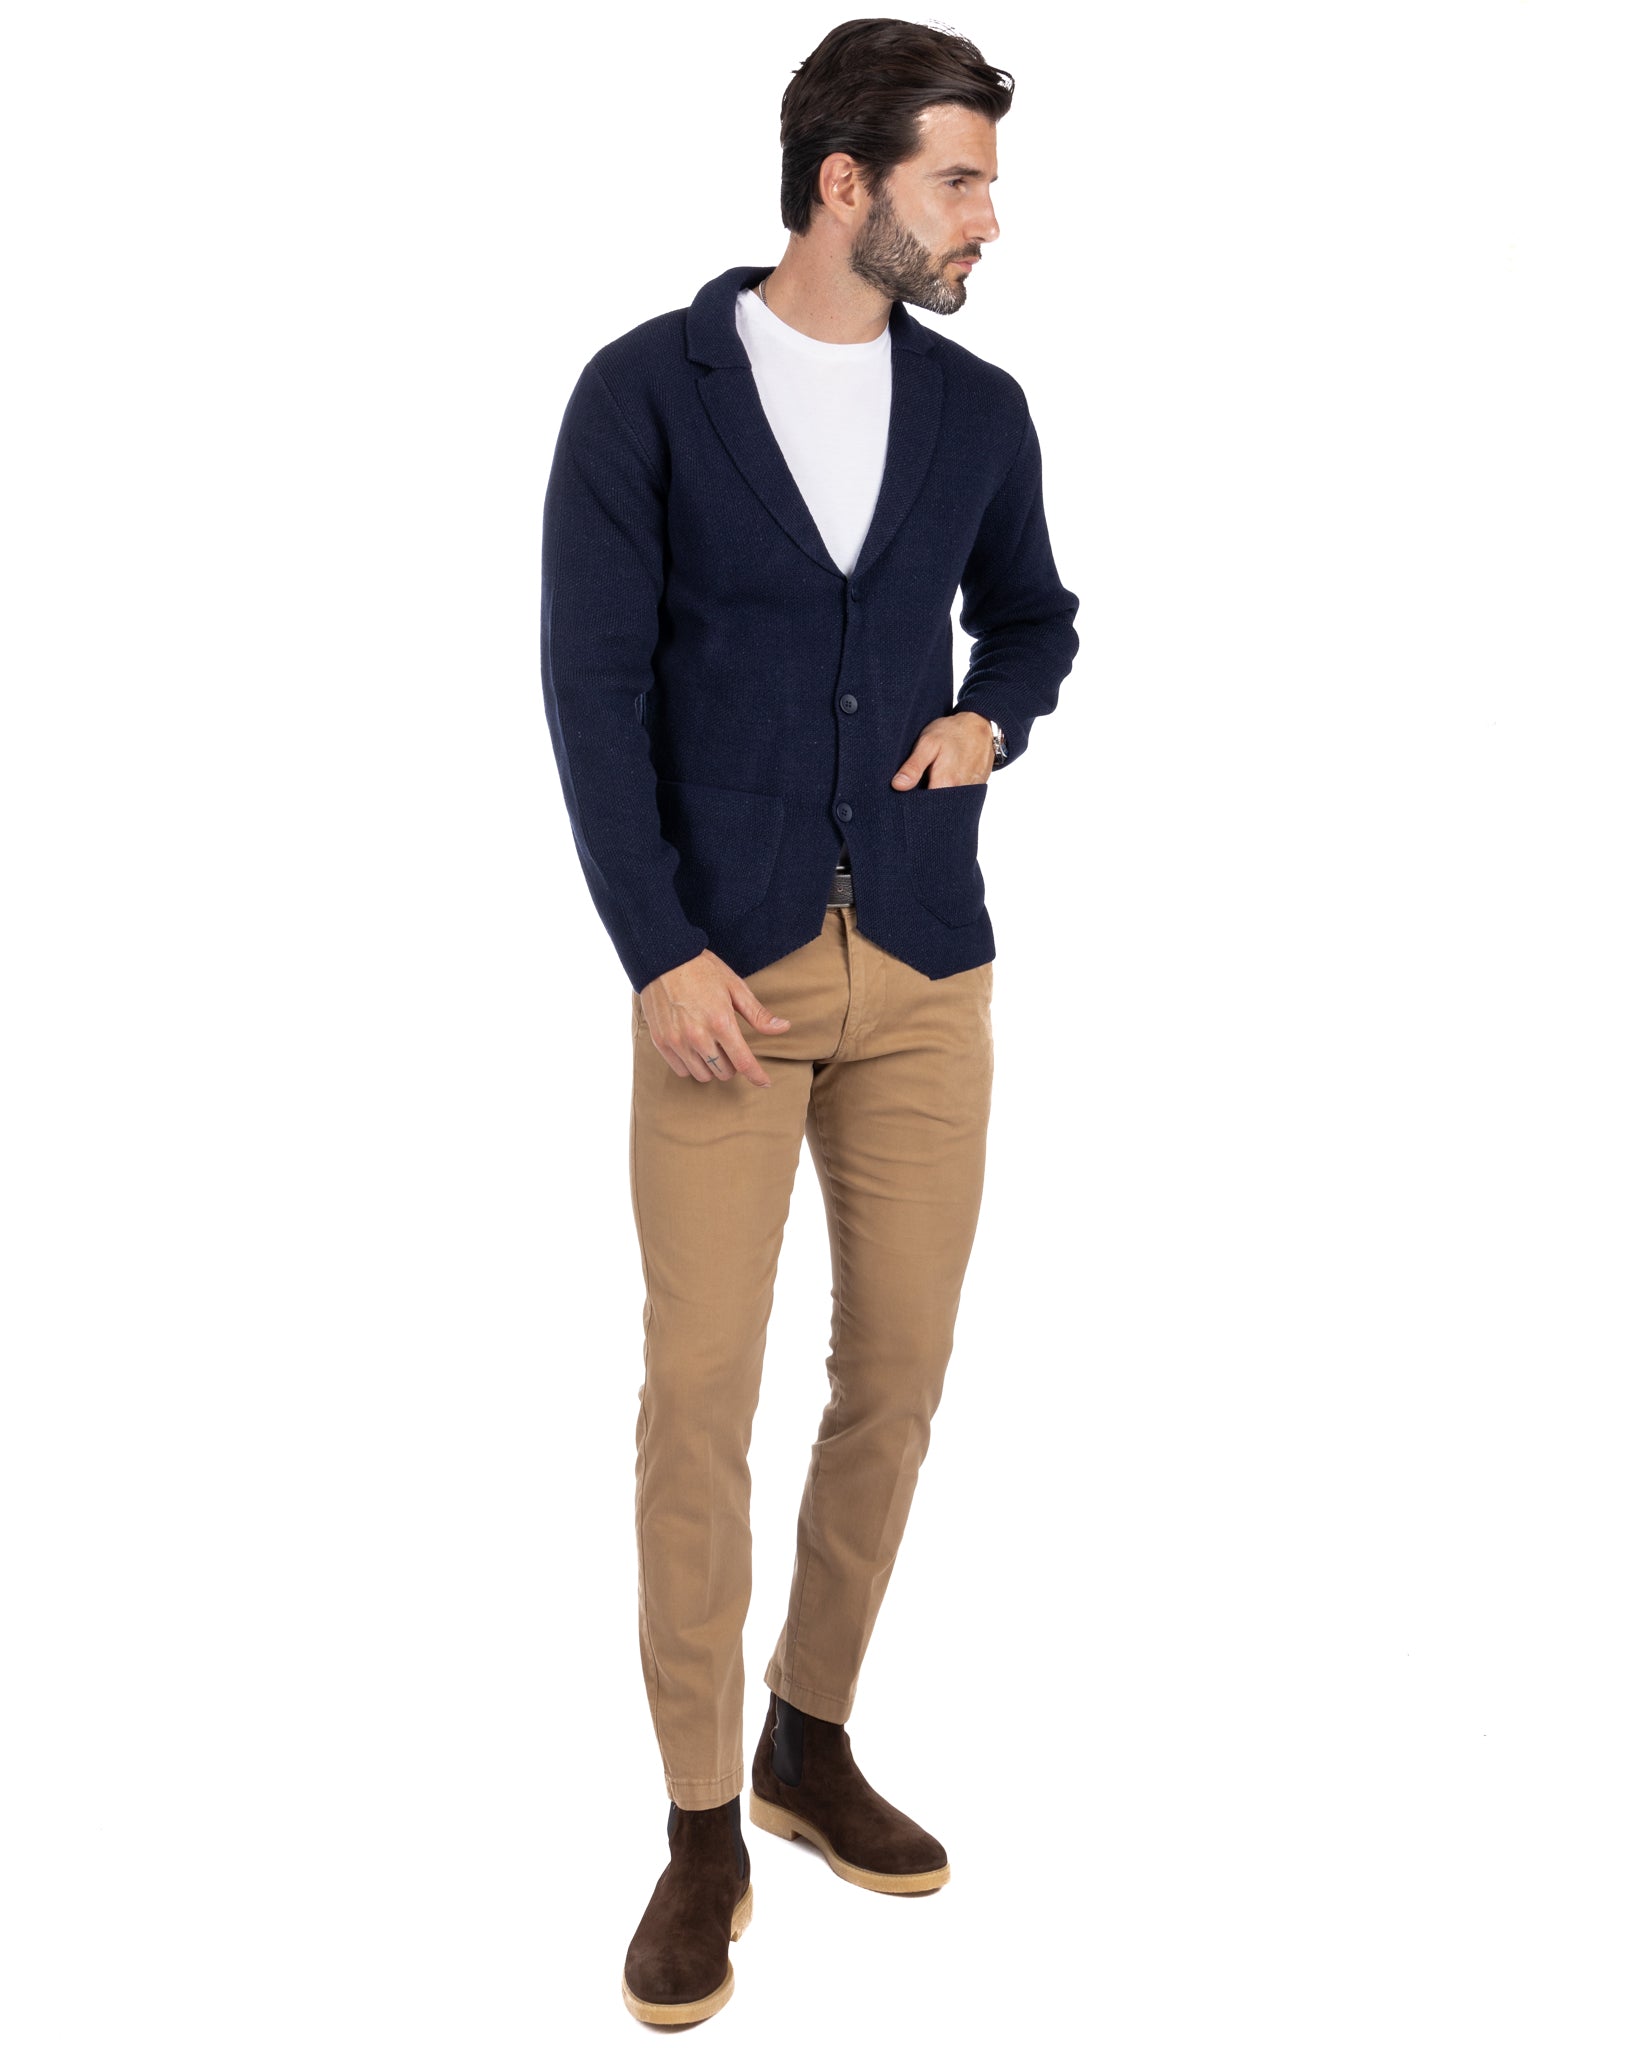 Laurent - blue knitted cardigan